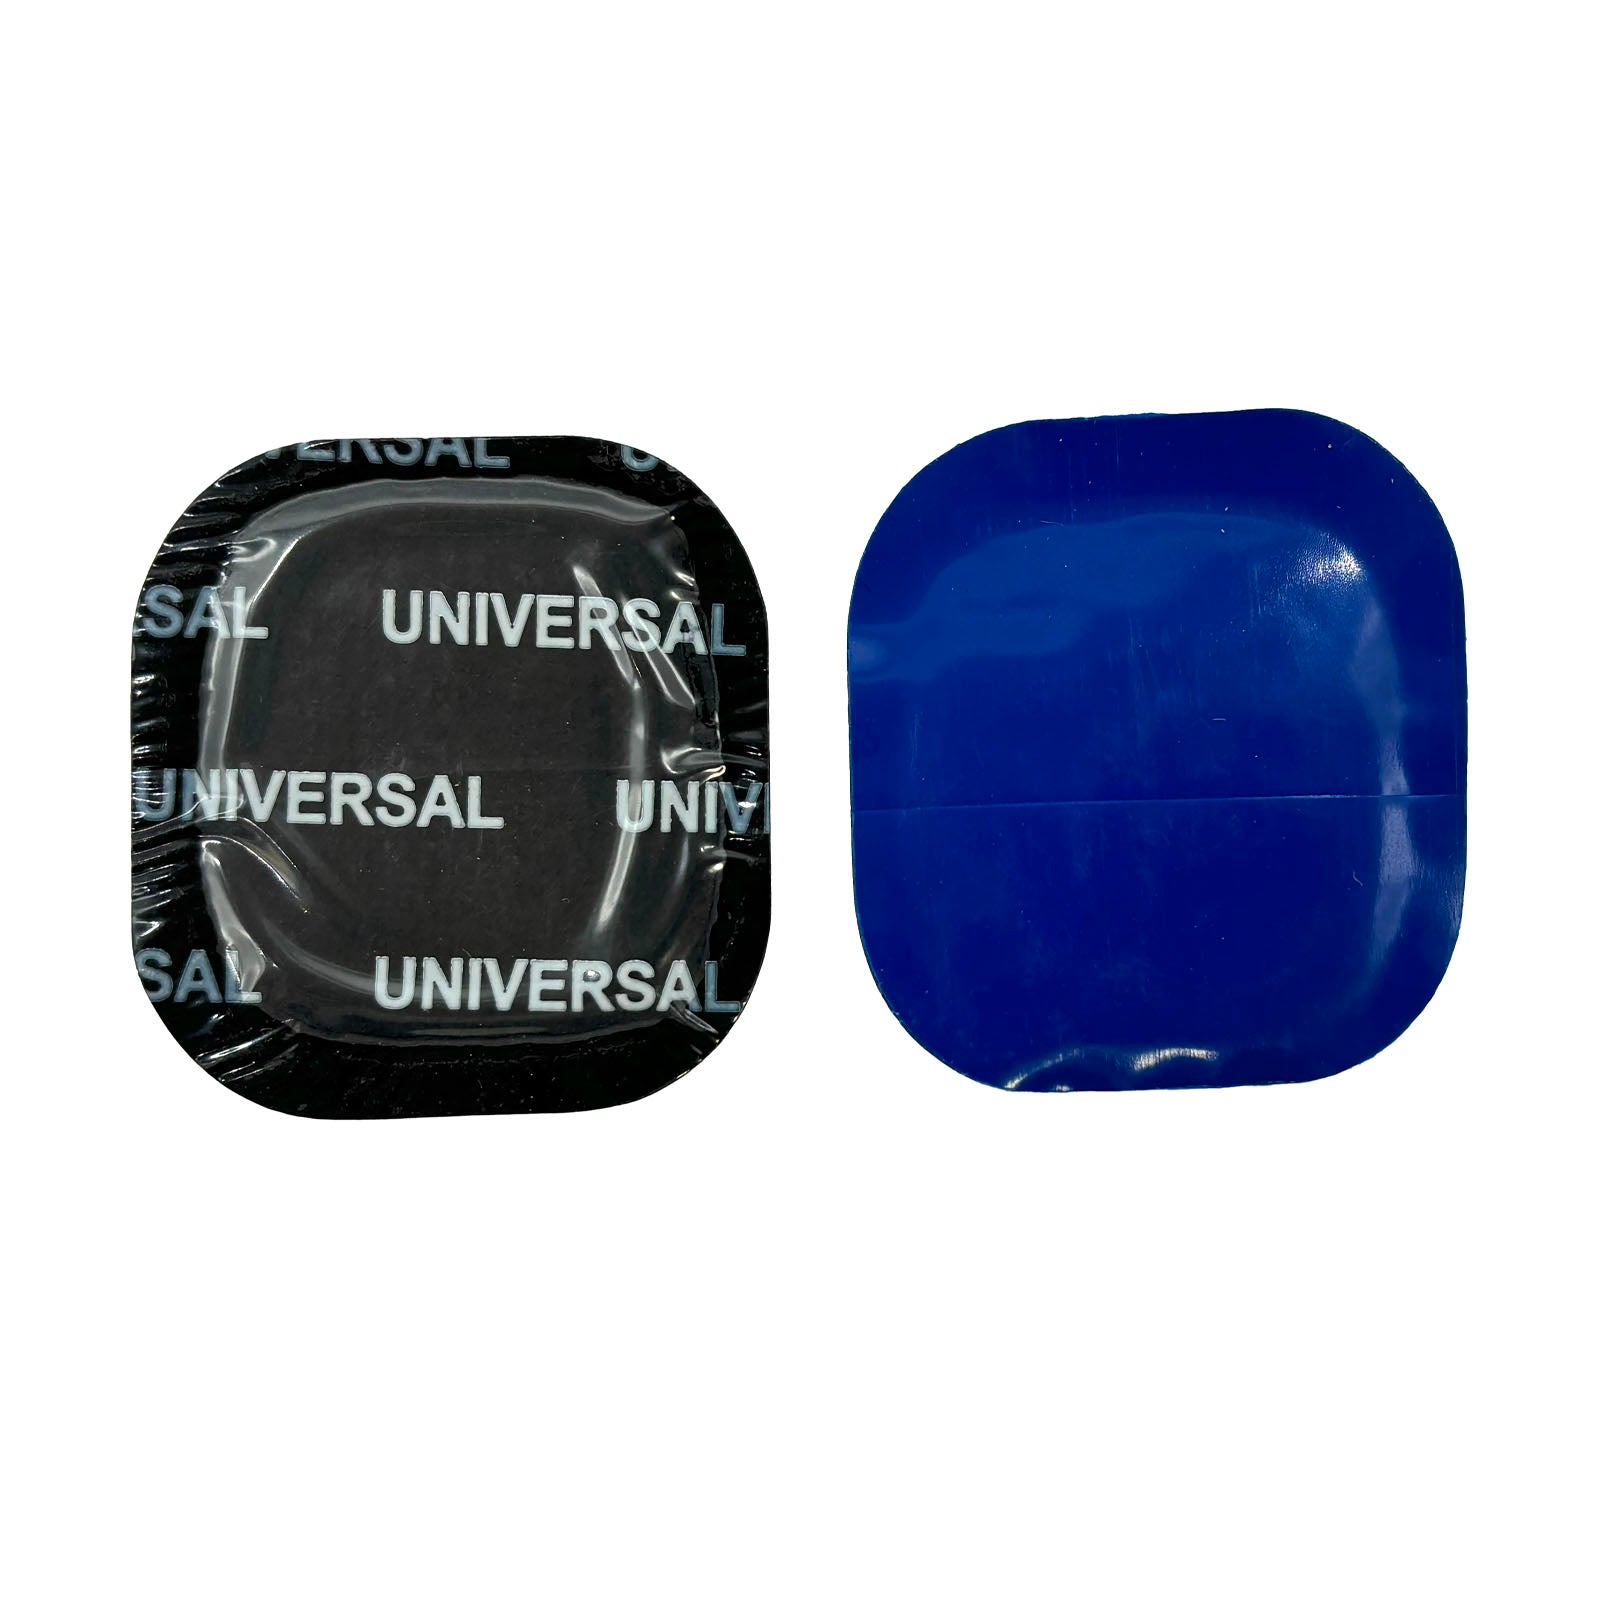 Kex UP-45 Universal Patch, 1-3/4" Square (30 bx)